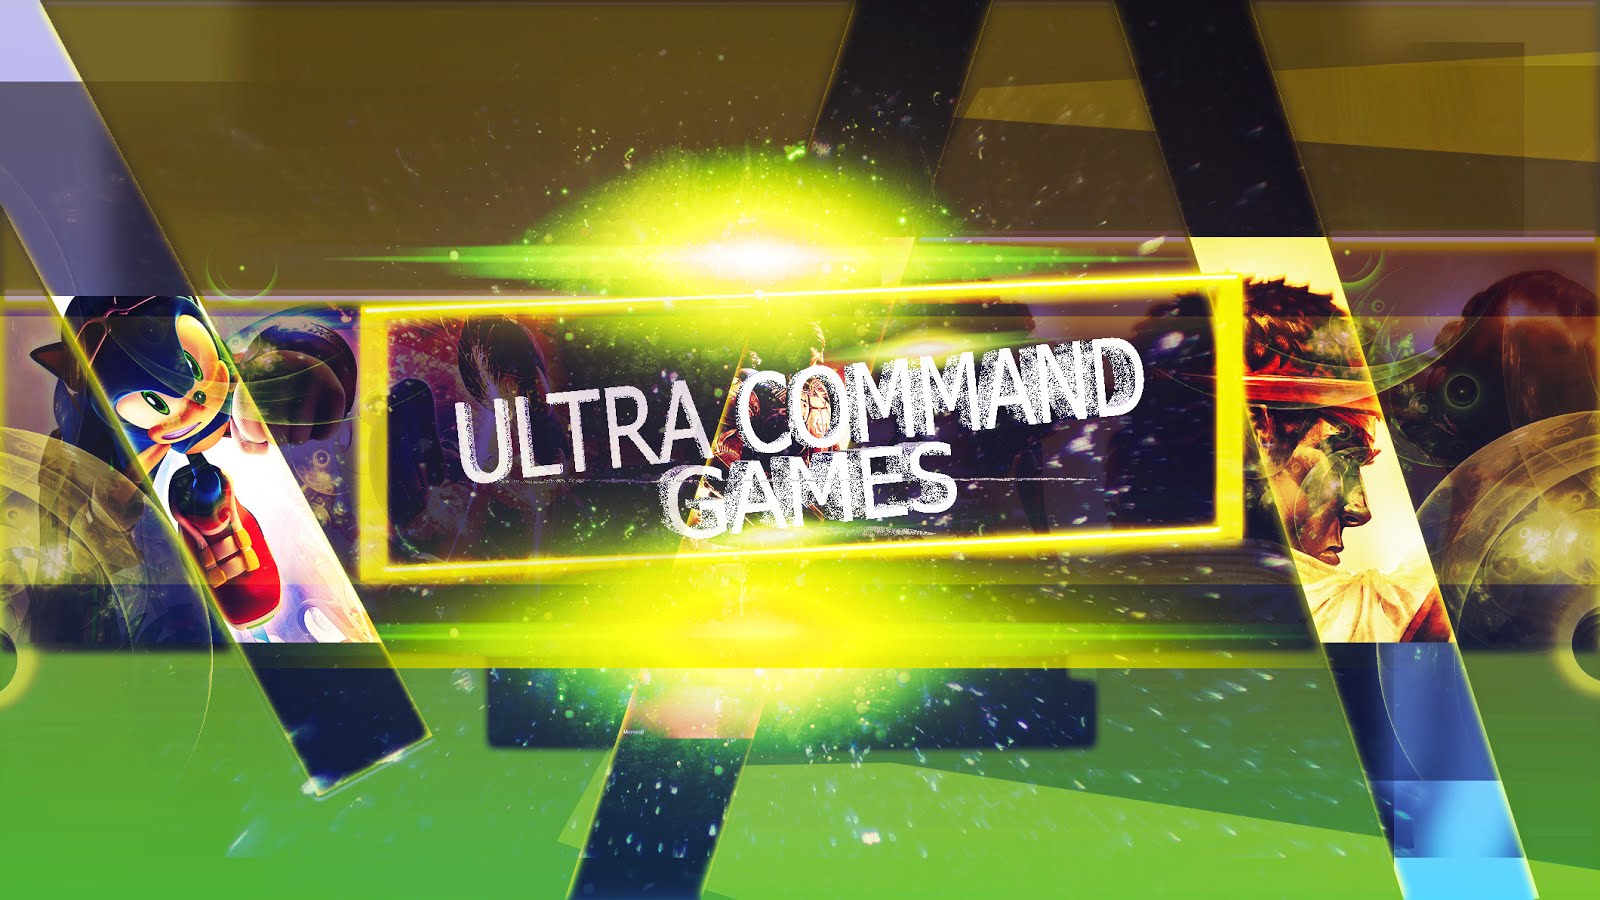 ULTRA COMMAND GAMES